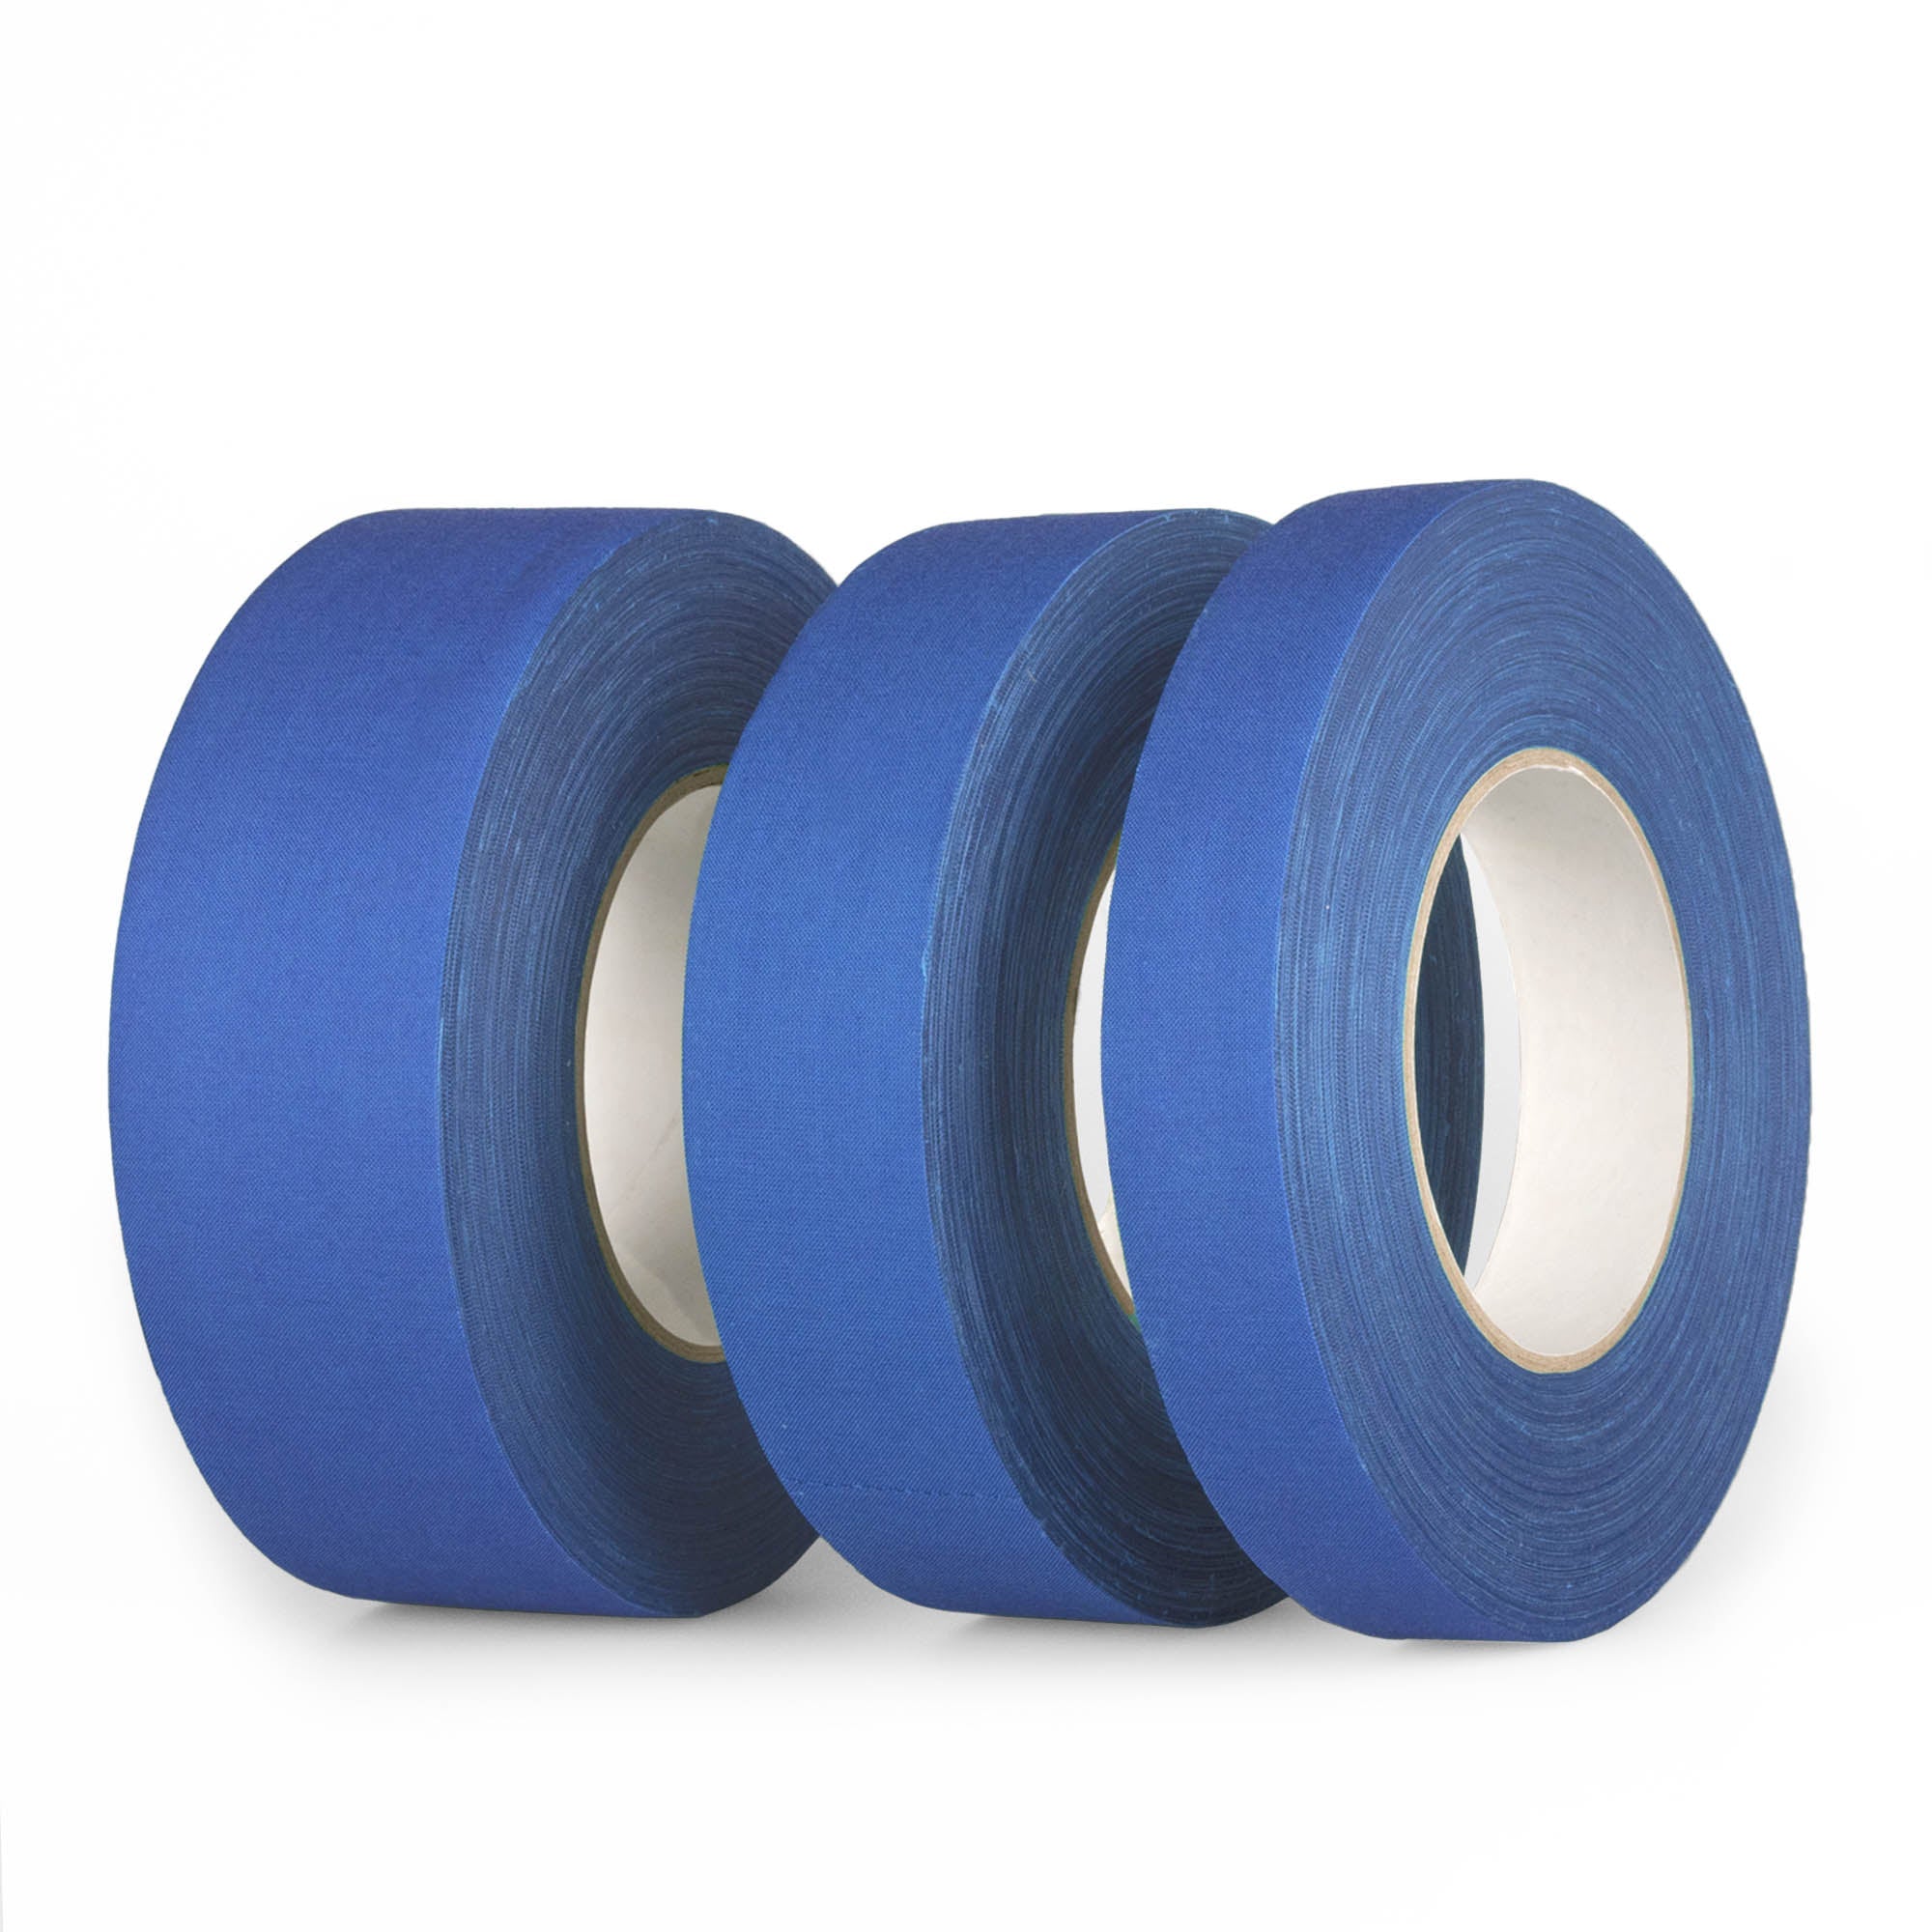 3 sizes of blue tape